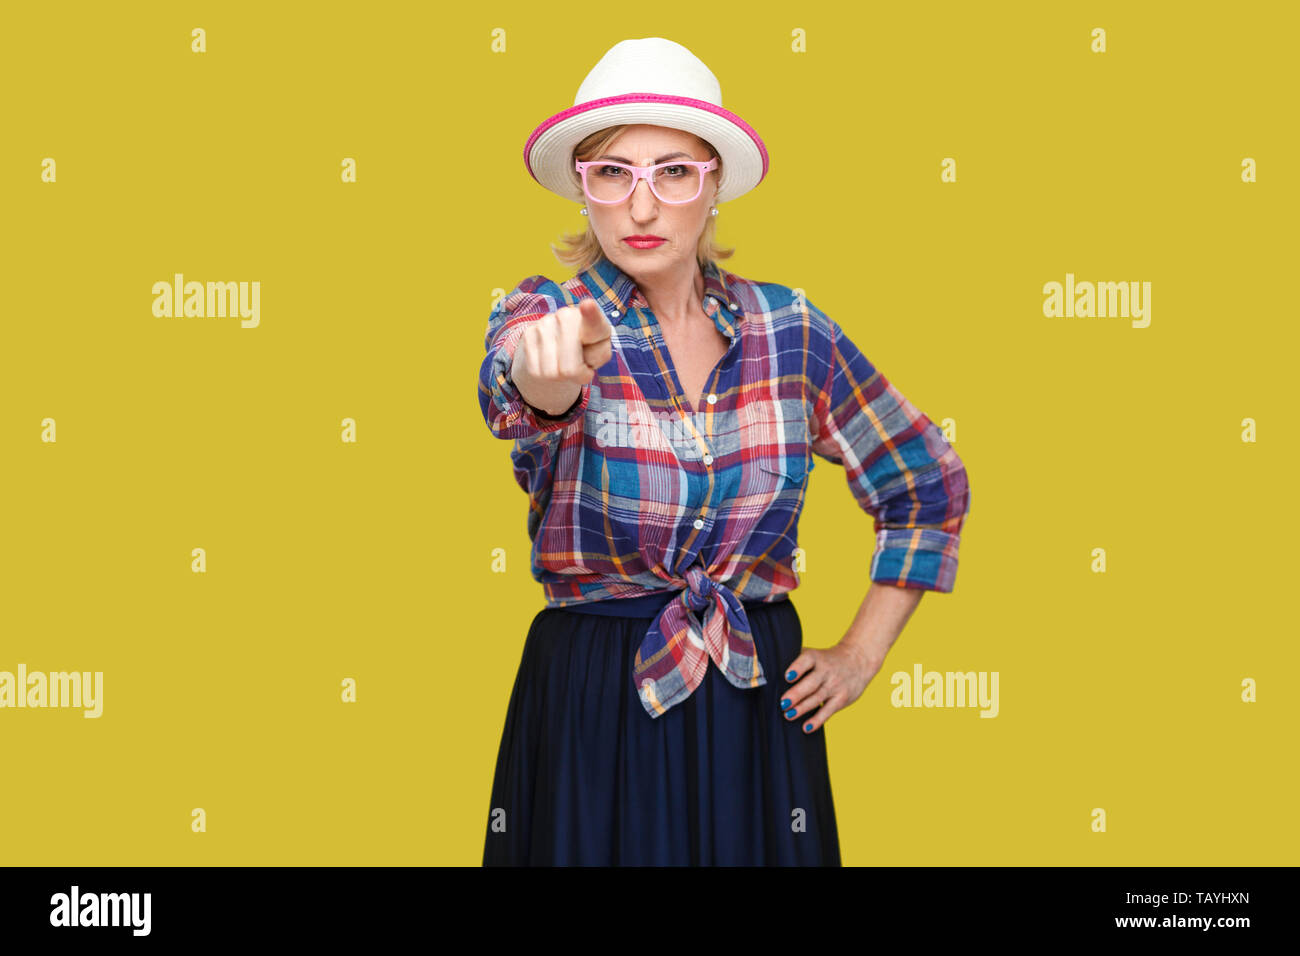 Hey you. Portrait of serious bossy modern stylish mature woman in casual style with hat and eyeglasses standing, pointing and looking at camera. indoo Stock Photo